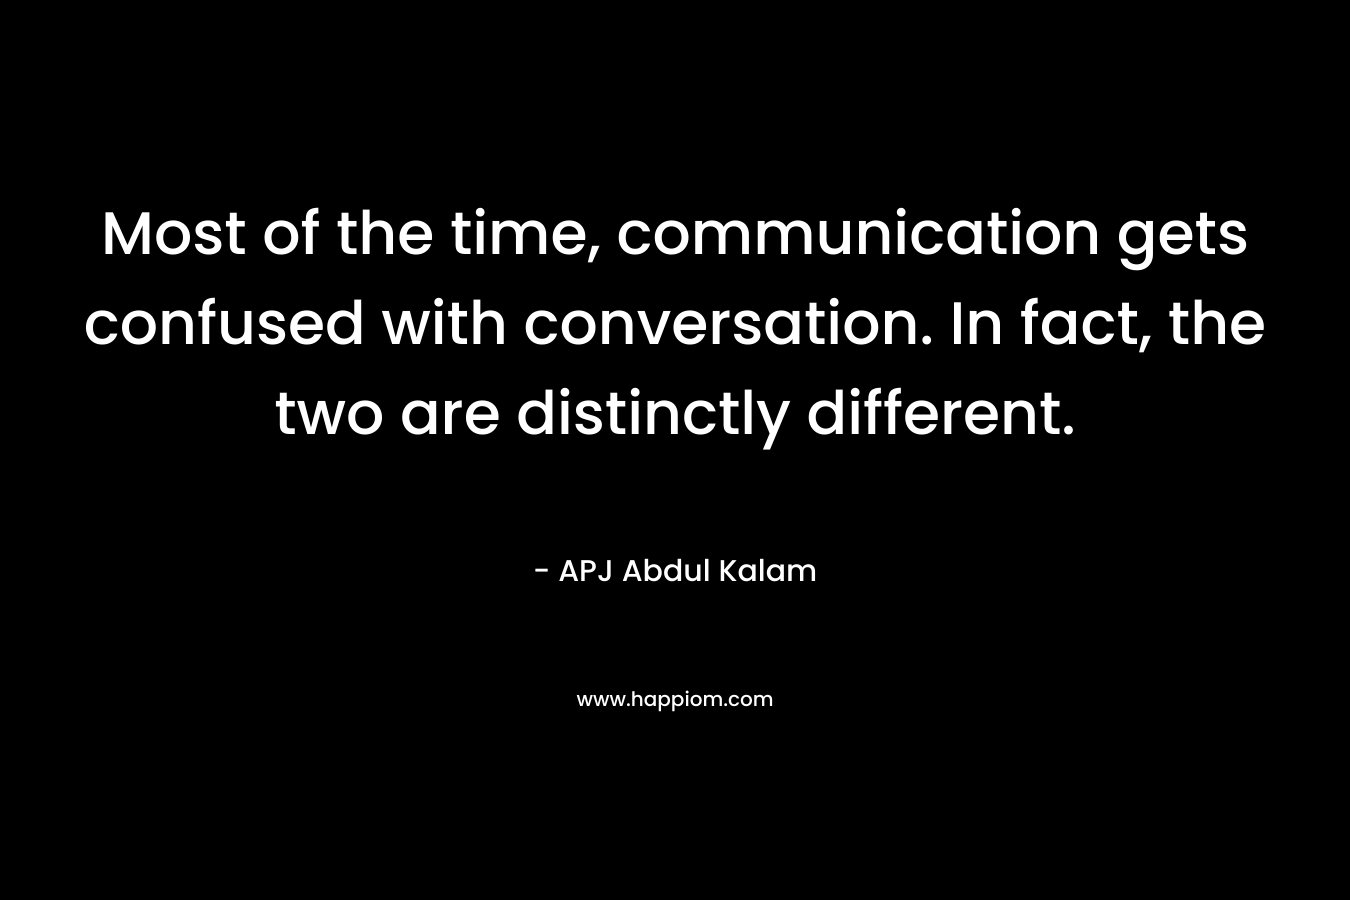 Most of the time, communication gets confused with conversation. In fact, the two are distinctly different. – APJ Abdul Kalam